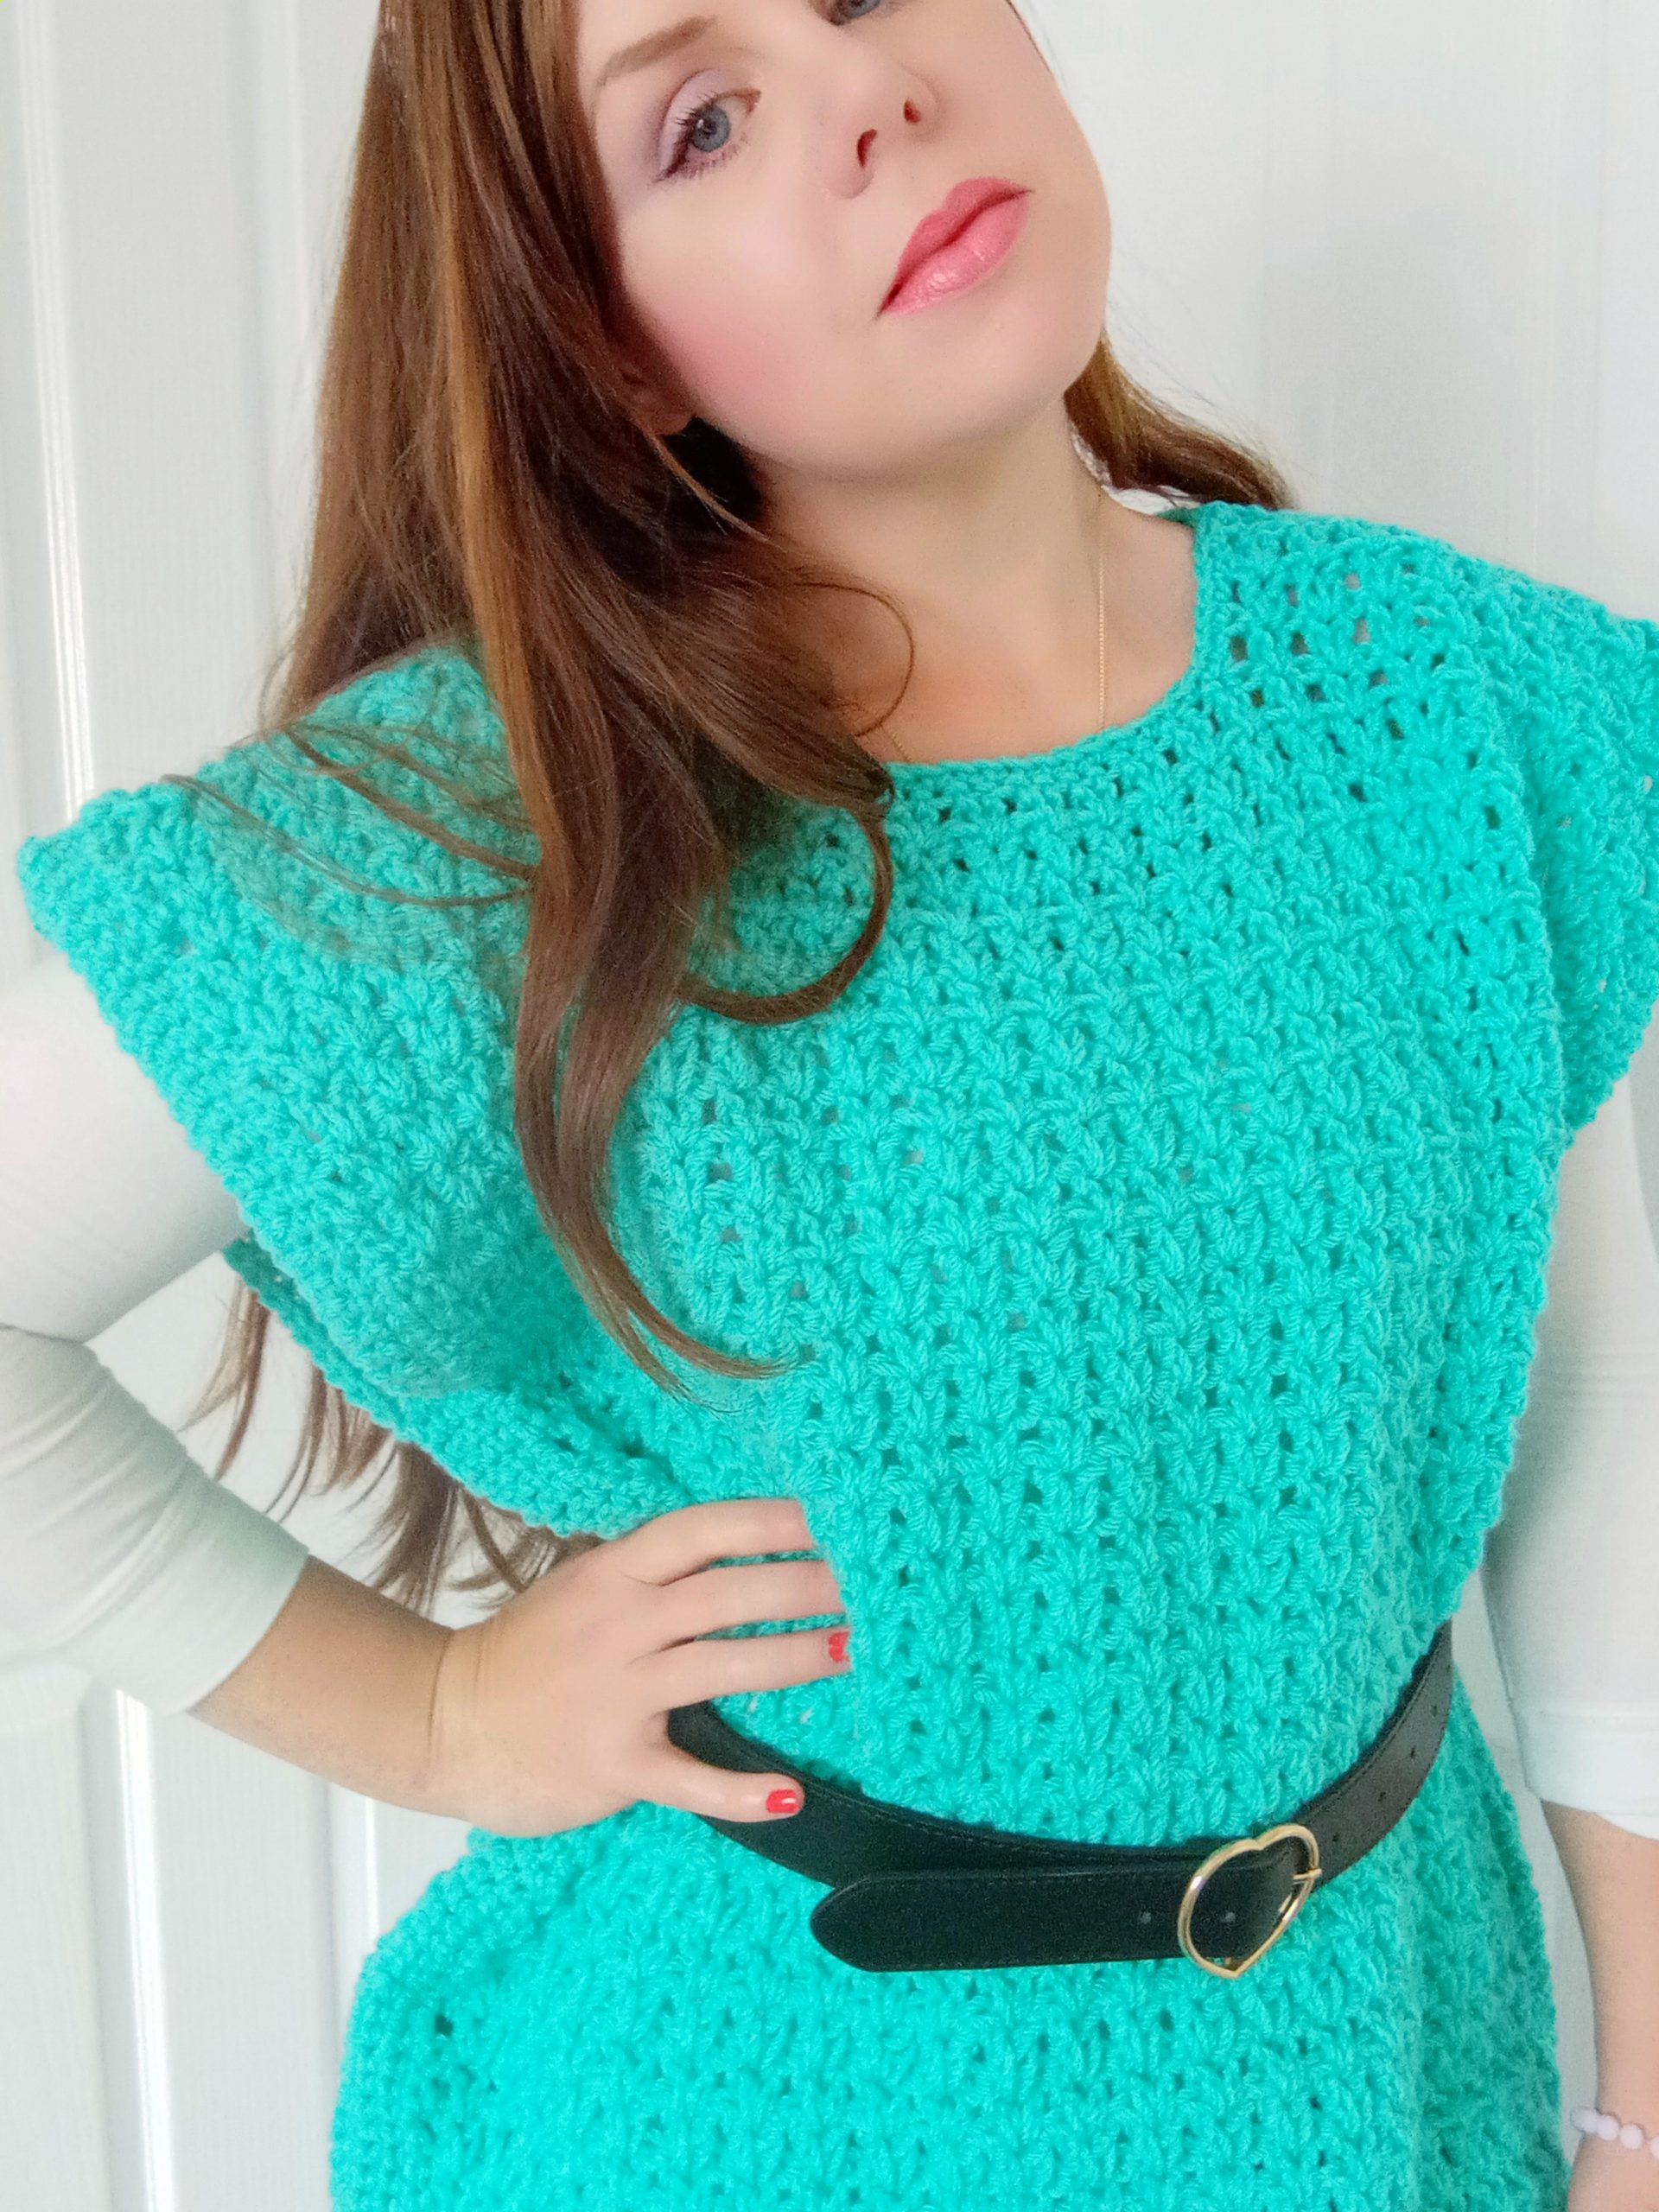 Hi everyone, this week I am bringing to you the crochet Aquamarine Poncho pattern. This very easy crochet project is beautiful and perfect for beginners. Crocheted fast using Lion Brand's Vanna's Choice yarn, it is a very dainty oversized poncho pattern. I hope you enjoy this easy tutorial!